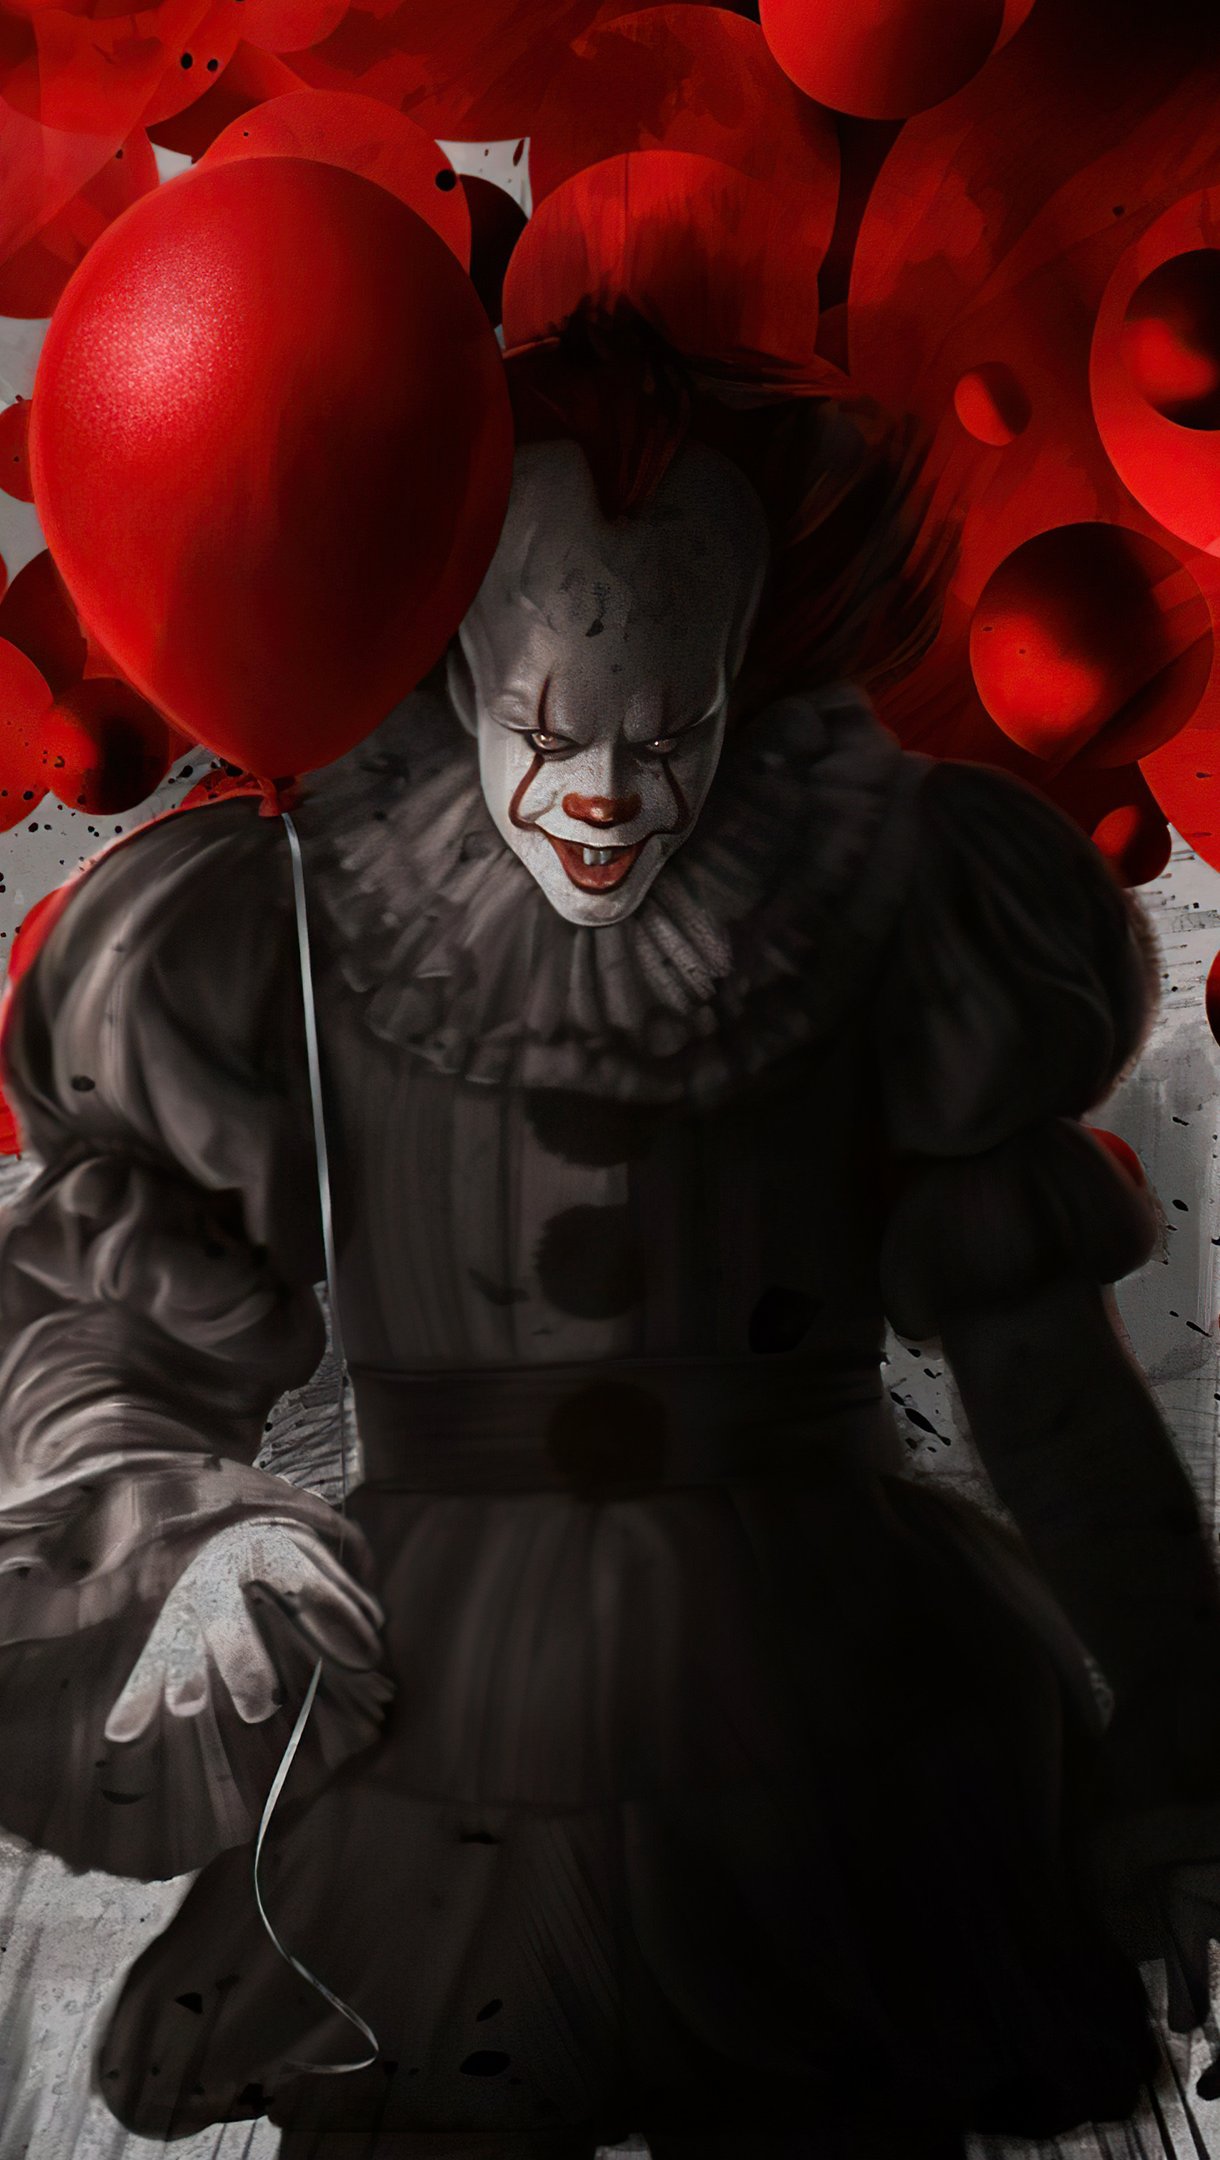 It Chapter Two Wallpapers